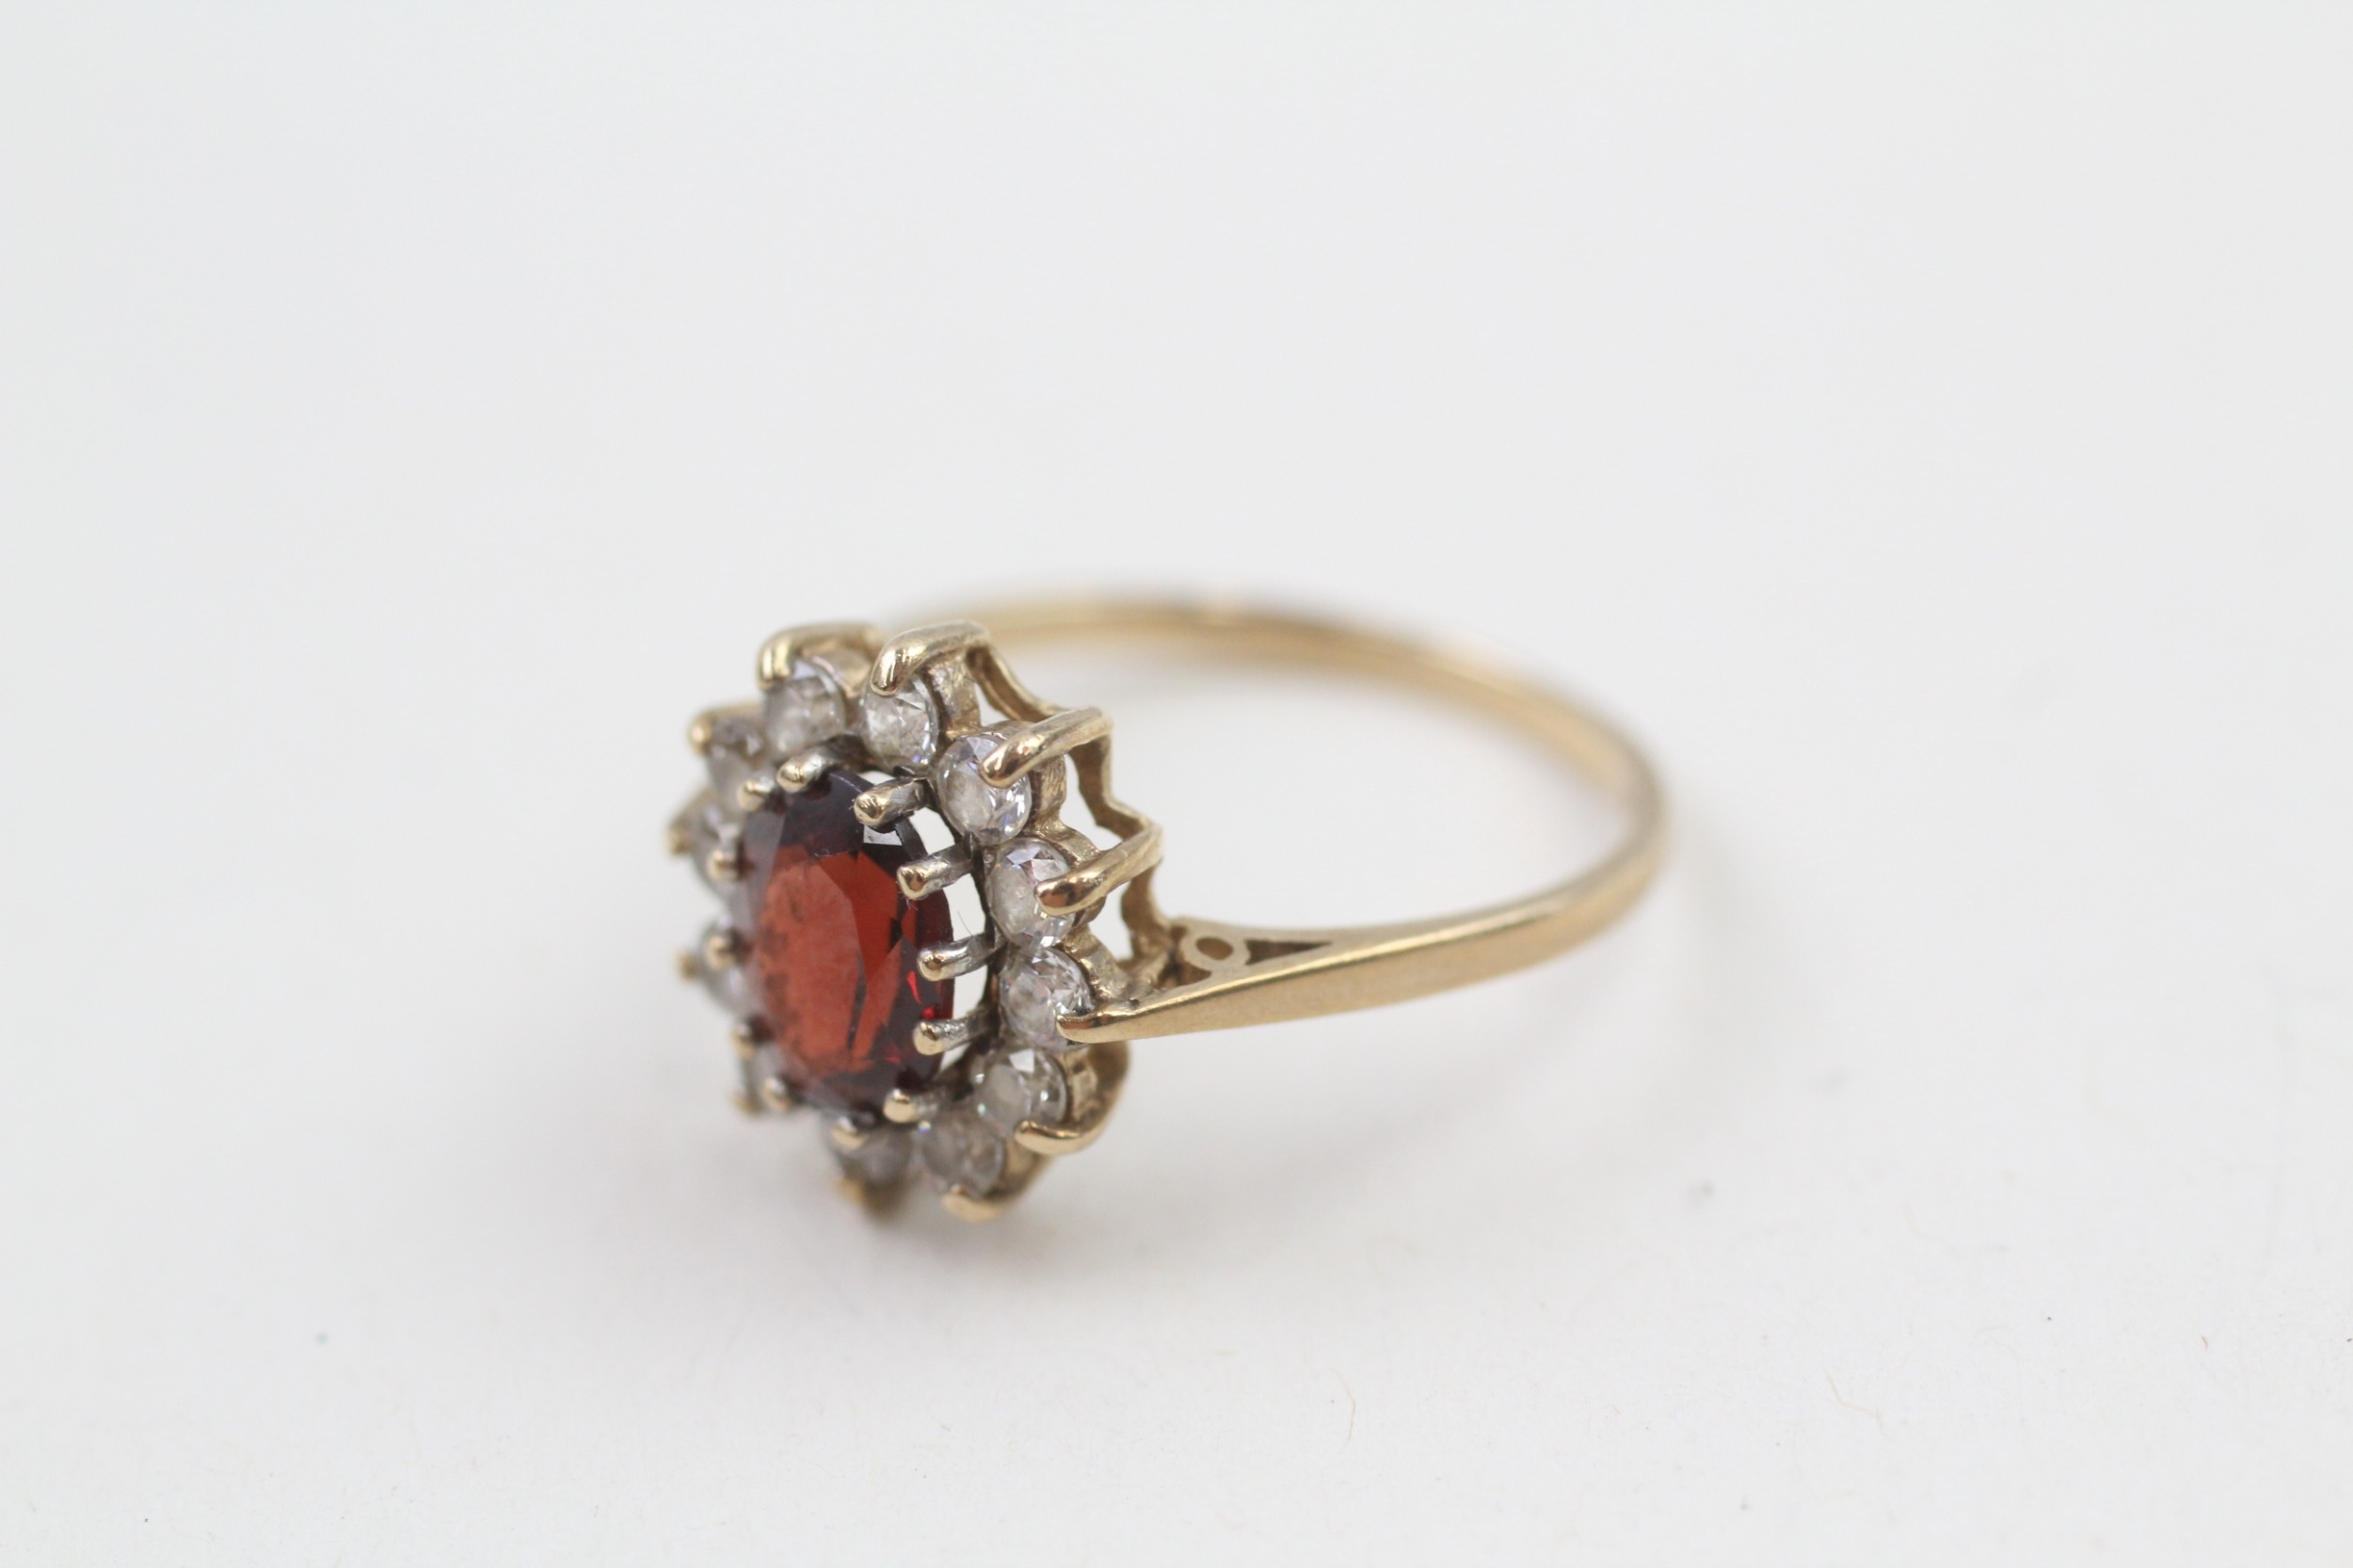 9ct gold red & white gemstone cluster ring (2.1g) - Image 2 of 5